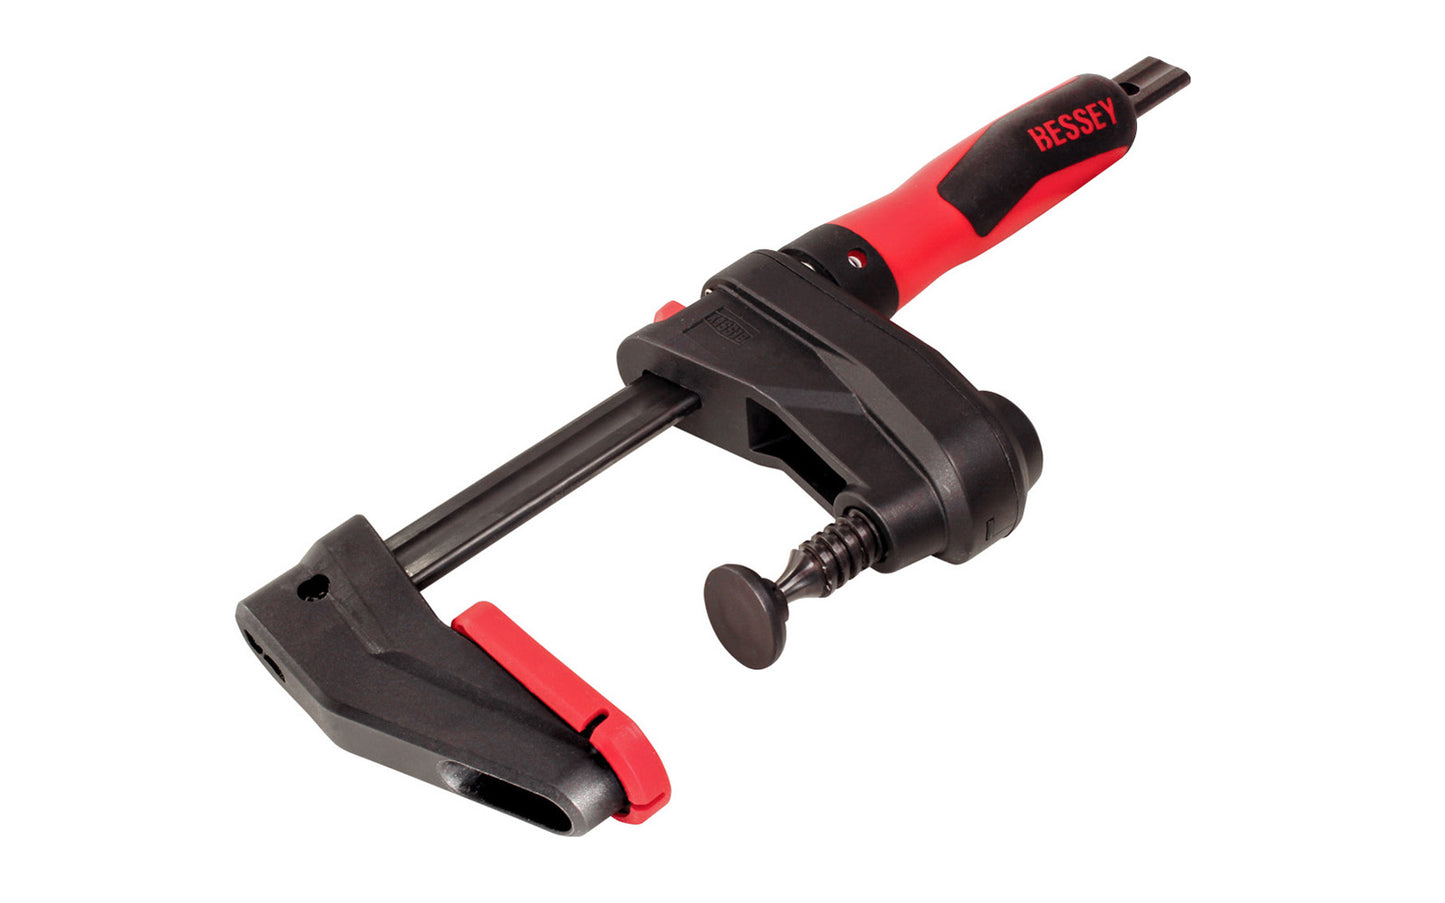 Bessey GearKlamp - 12" Opening Capacity ~ GK30 creates the possibility of reaching "into” confined spaces to achieve clamping solutions. Fast action, secure clamping force up to 450 lbs. 12" max opening - 2-3/8" throat depth. Quick-release shift button to quickly adjust sliding bar. Model GK30. 788502204439